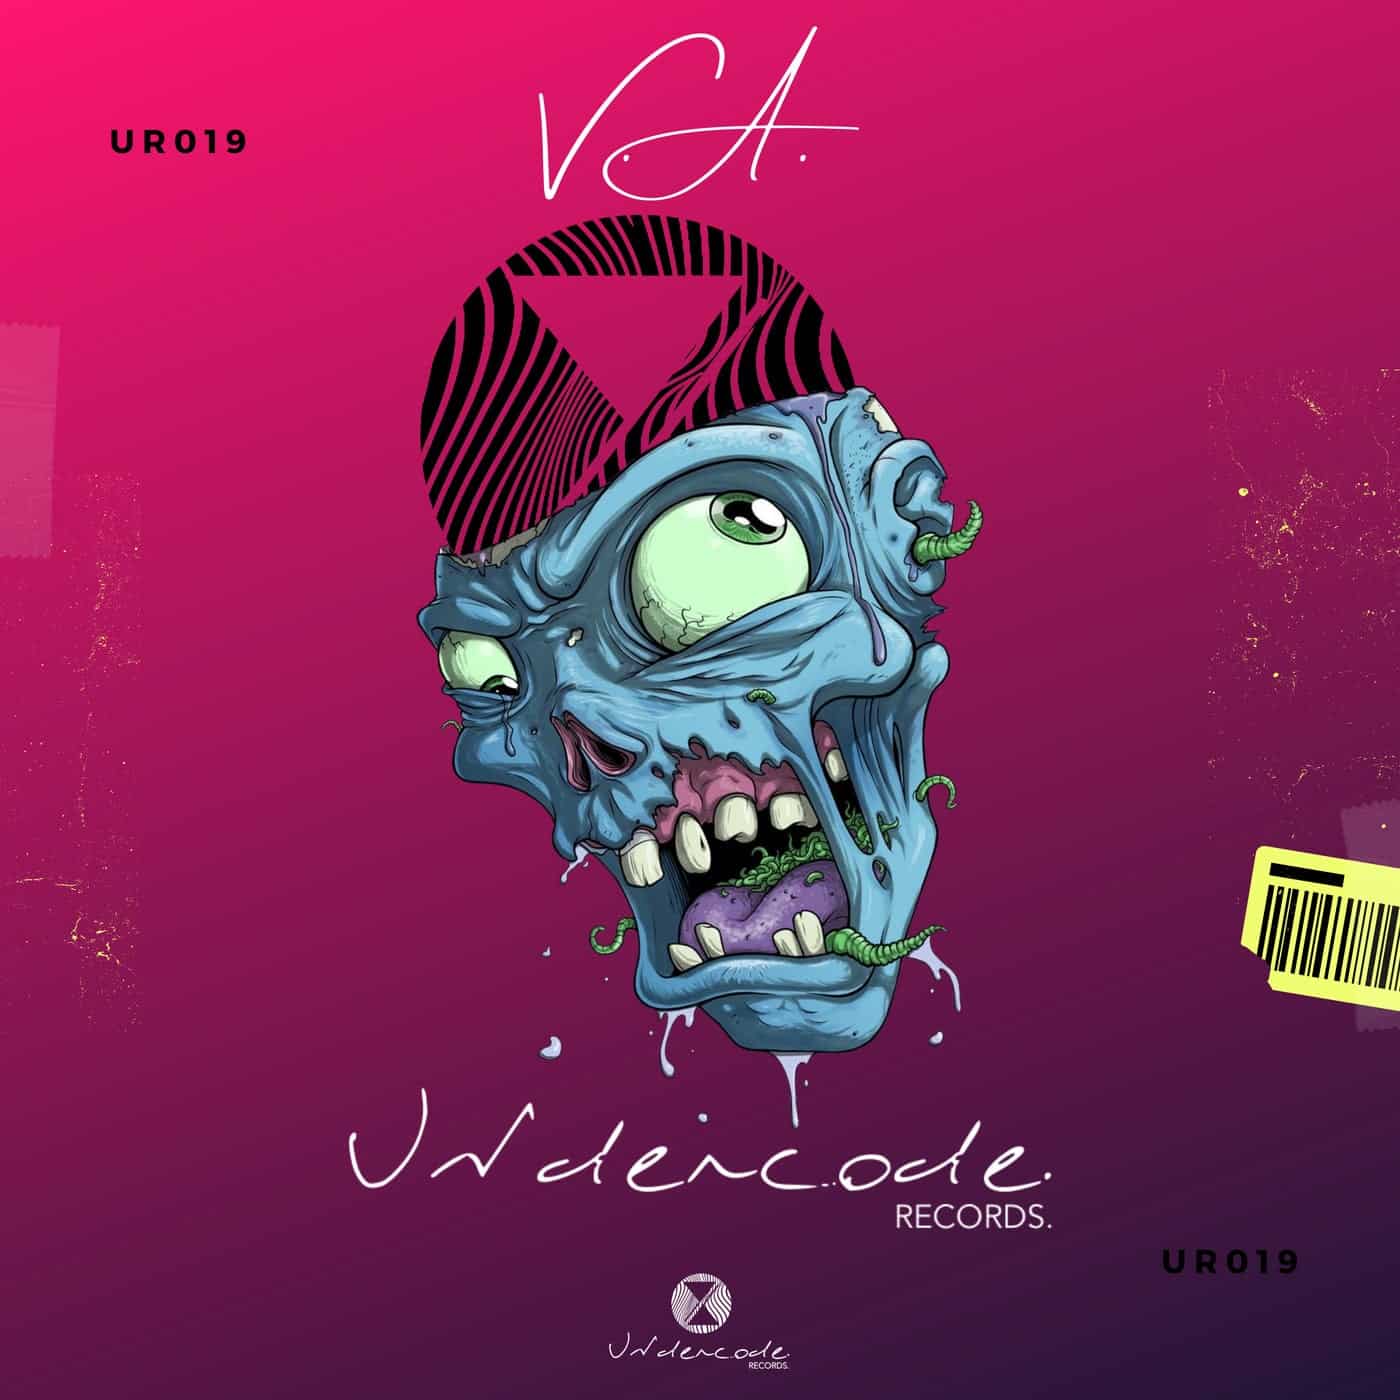 Download V.A. Undercode Records. Vol.02 on Electrobuzz